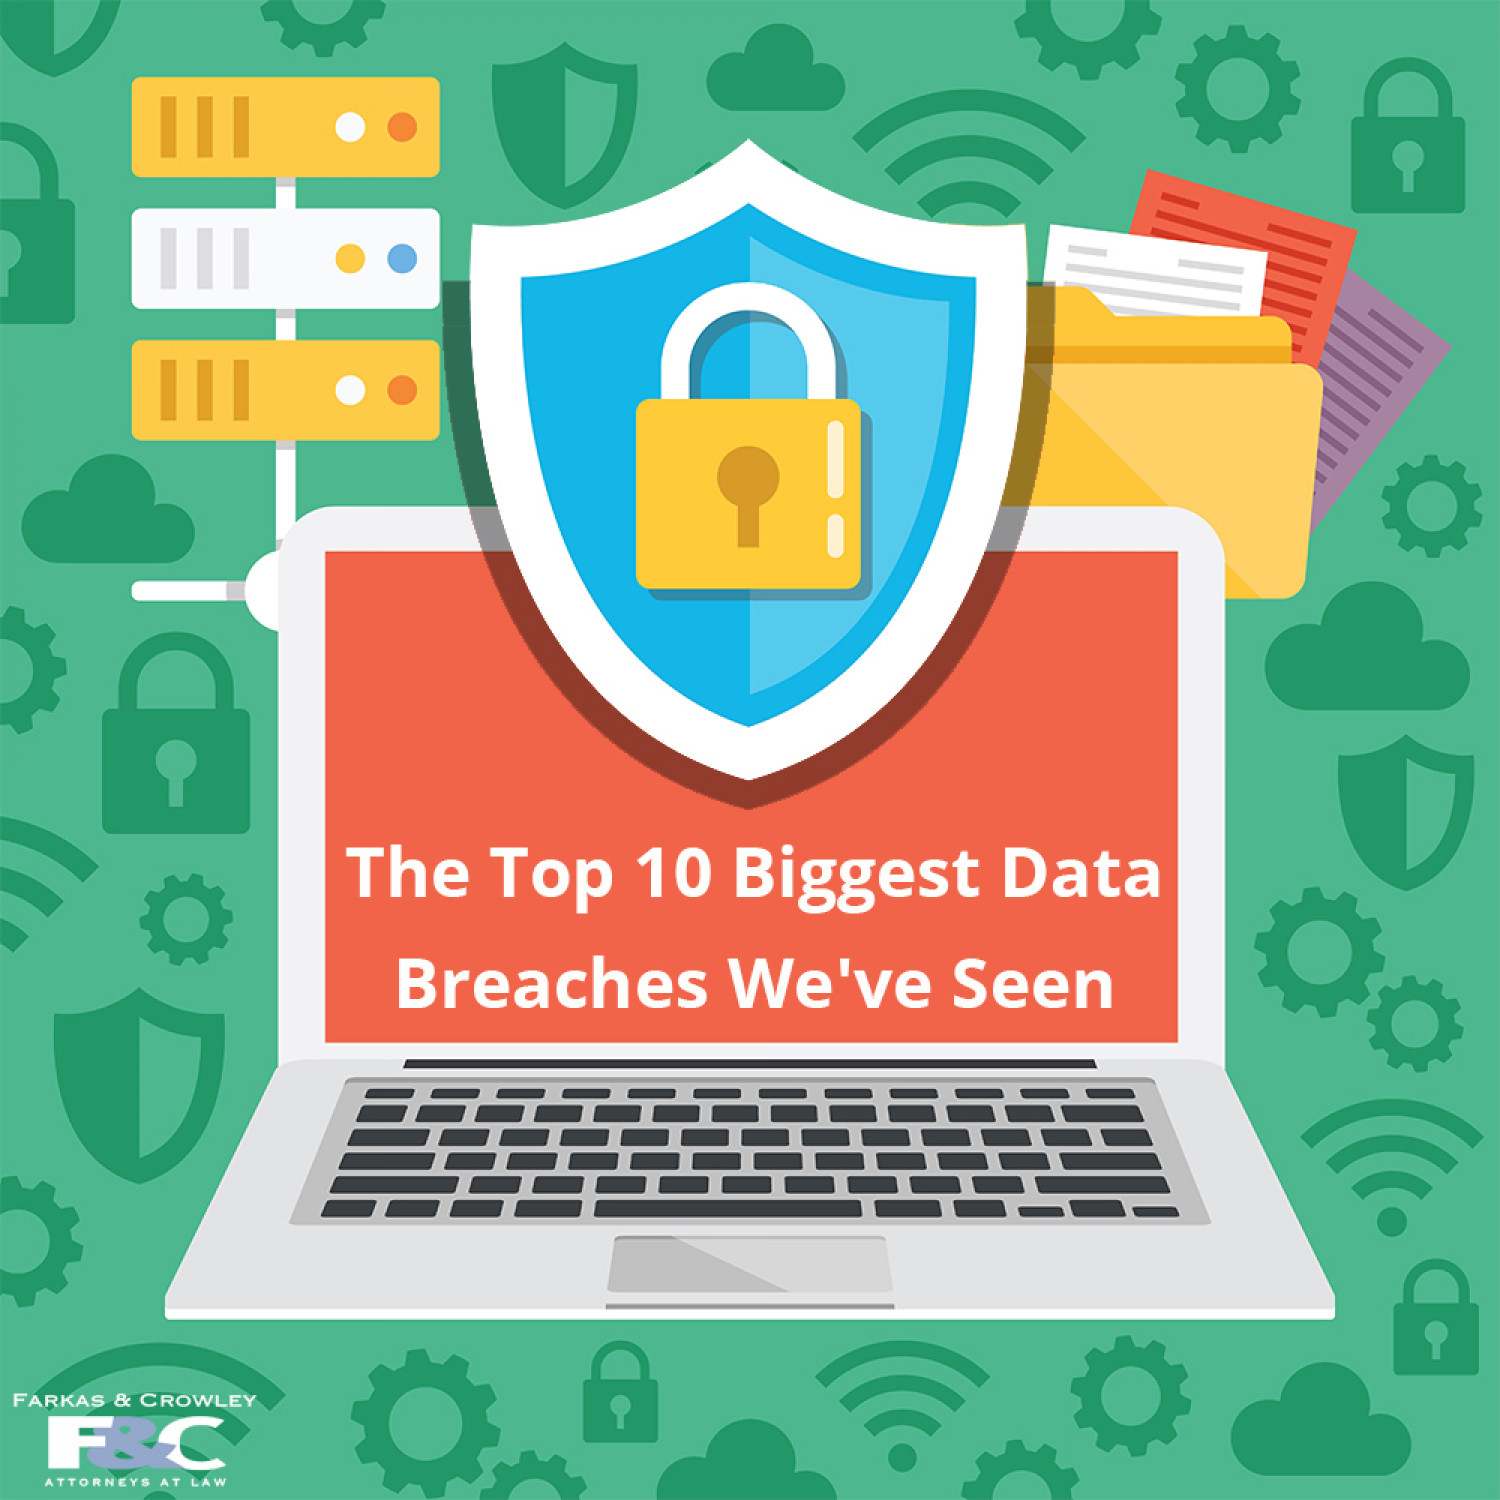 The Top 10 Biggest Data Breaches We’ve Seen Infographic